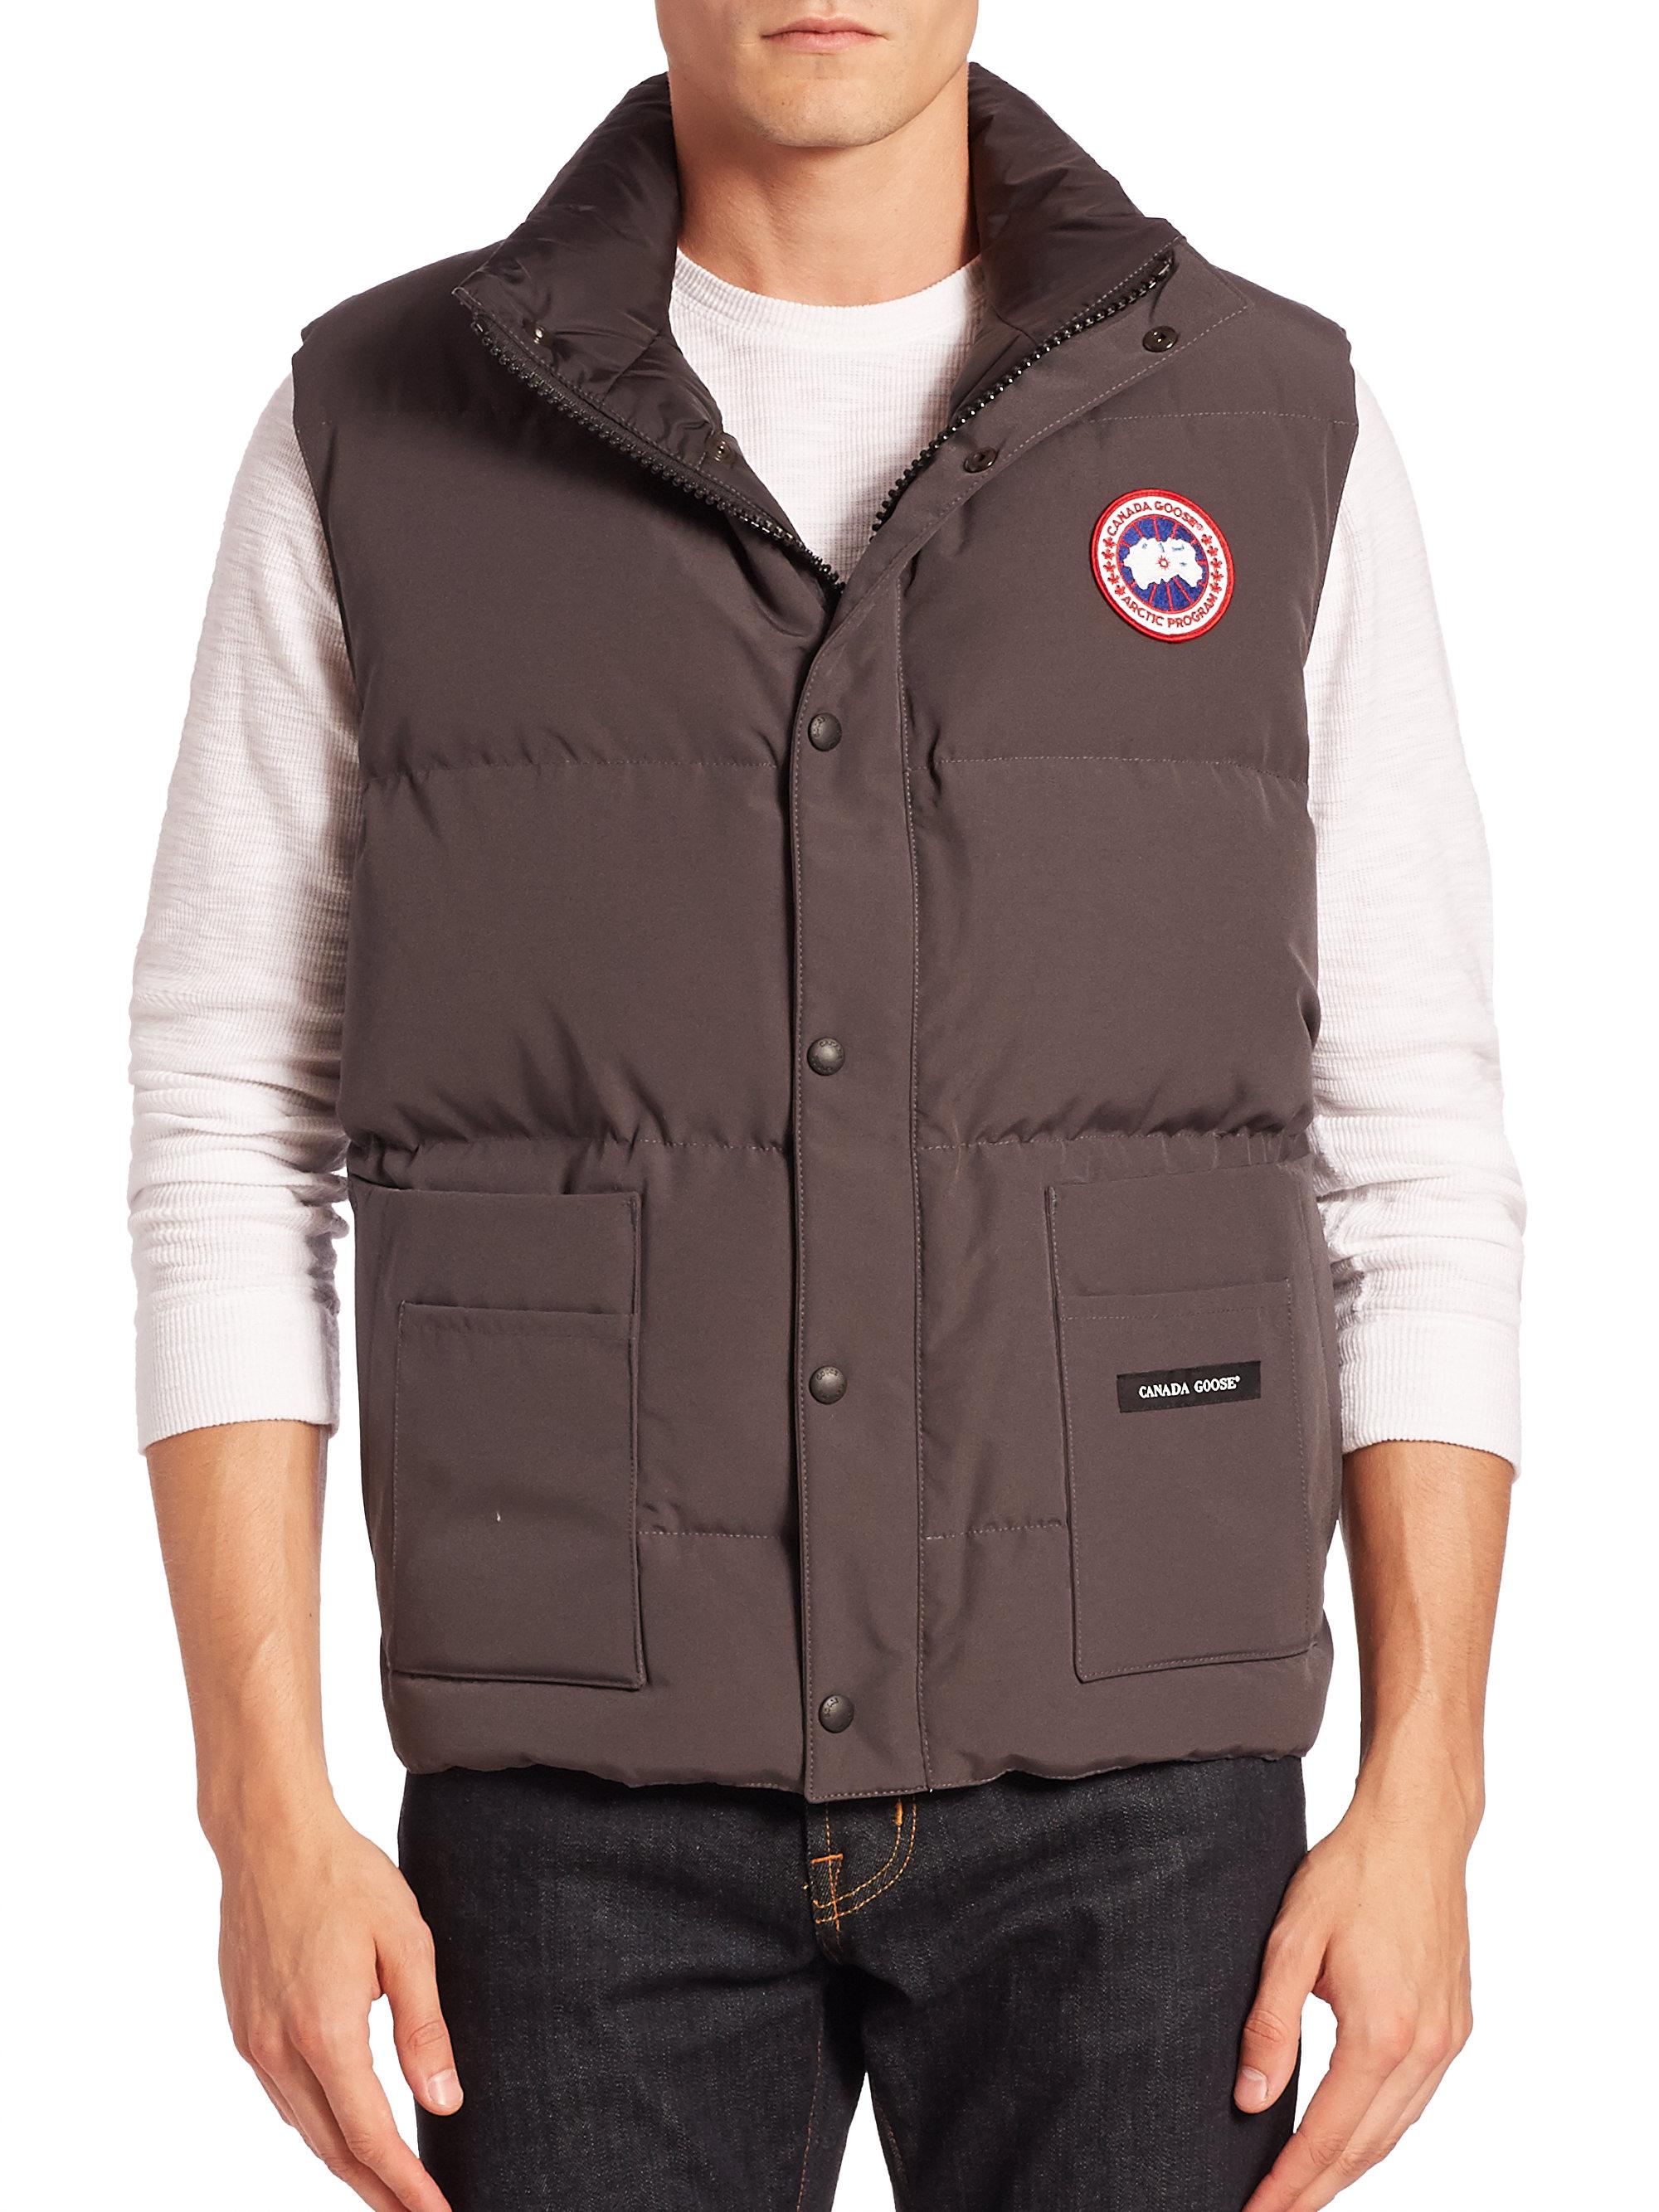 Canada Goose Freestyle Puffer Vest in Graphite (Gray) for Men - Lyst